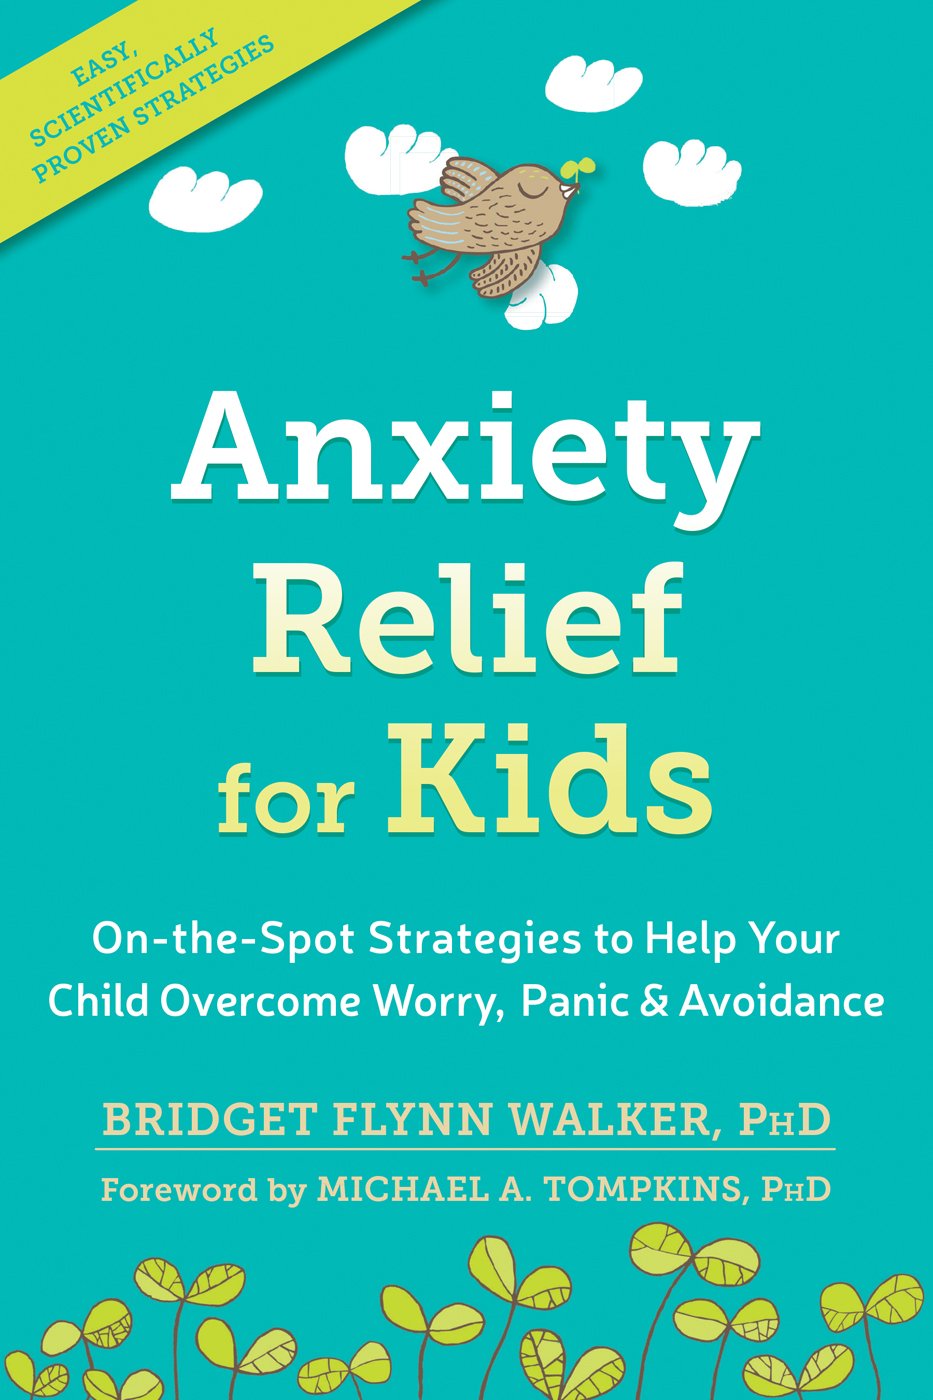 Anxiety Relief for Kids On-the-Spot Strategies to Help Your Child Overcome Worry, Panic, and Avoidance